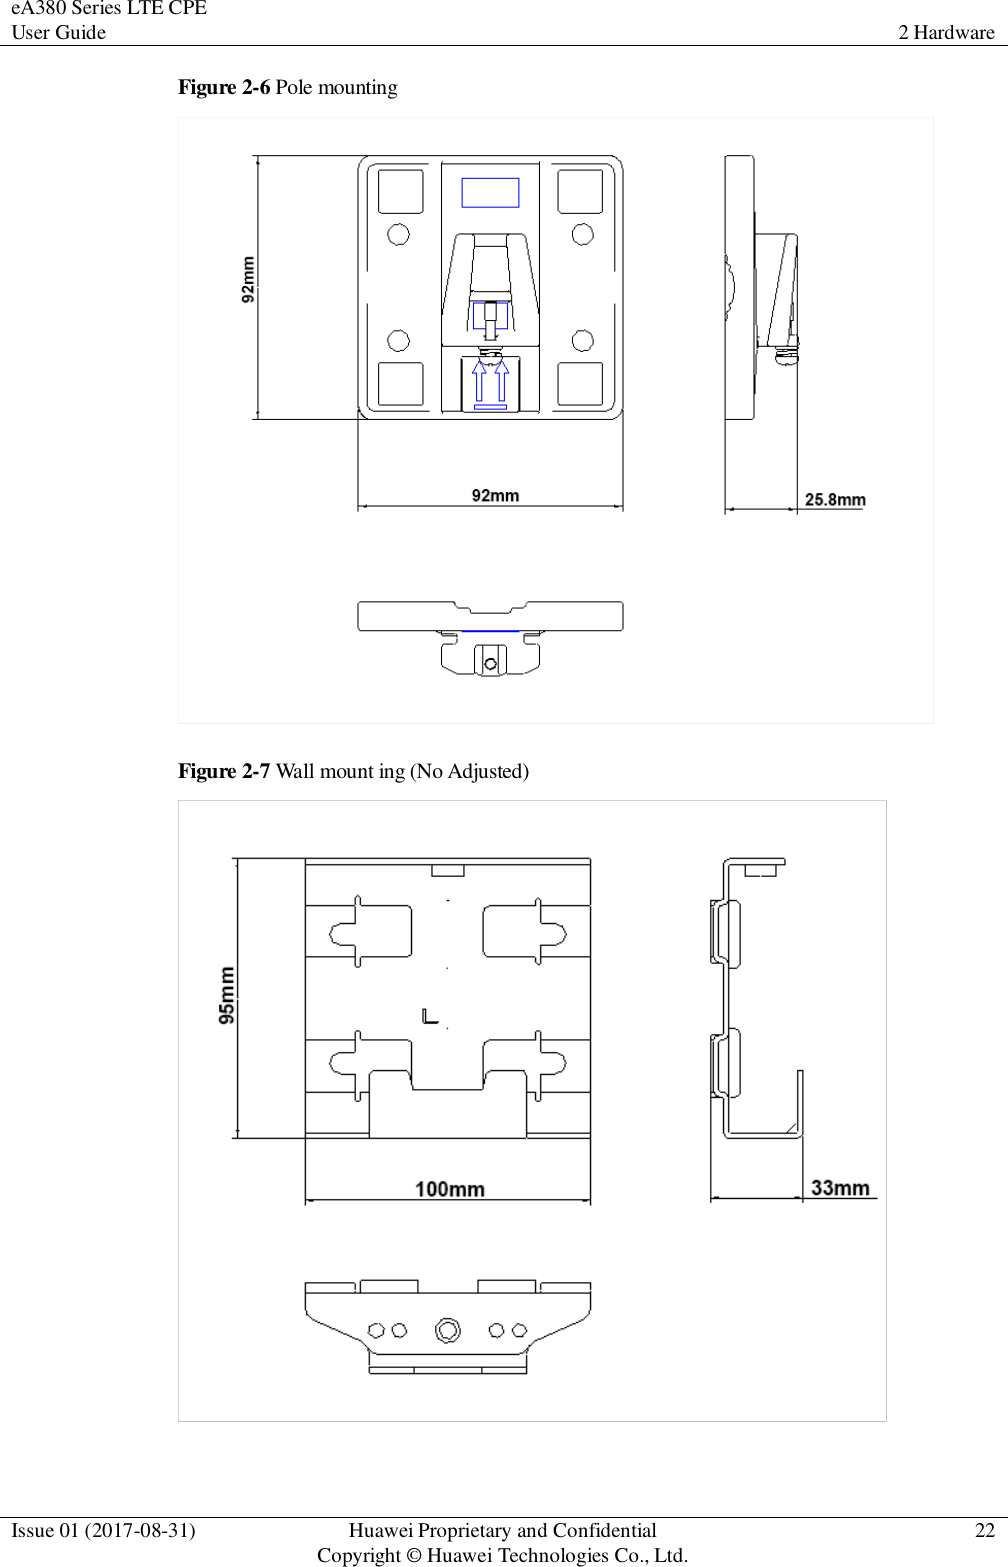 eA380 Series LTE CPE User Guide 2 Hardware  Issue 01 (2017-08-31) Huawei Proprietary and Confidential                                     Copyright © Huawei Technologies Co., Ltd. 22  Figure 2-6 Pole mounting  Figure 2-7 Wall mount ing (No Adjusted)   